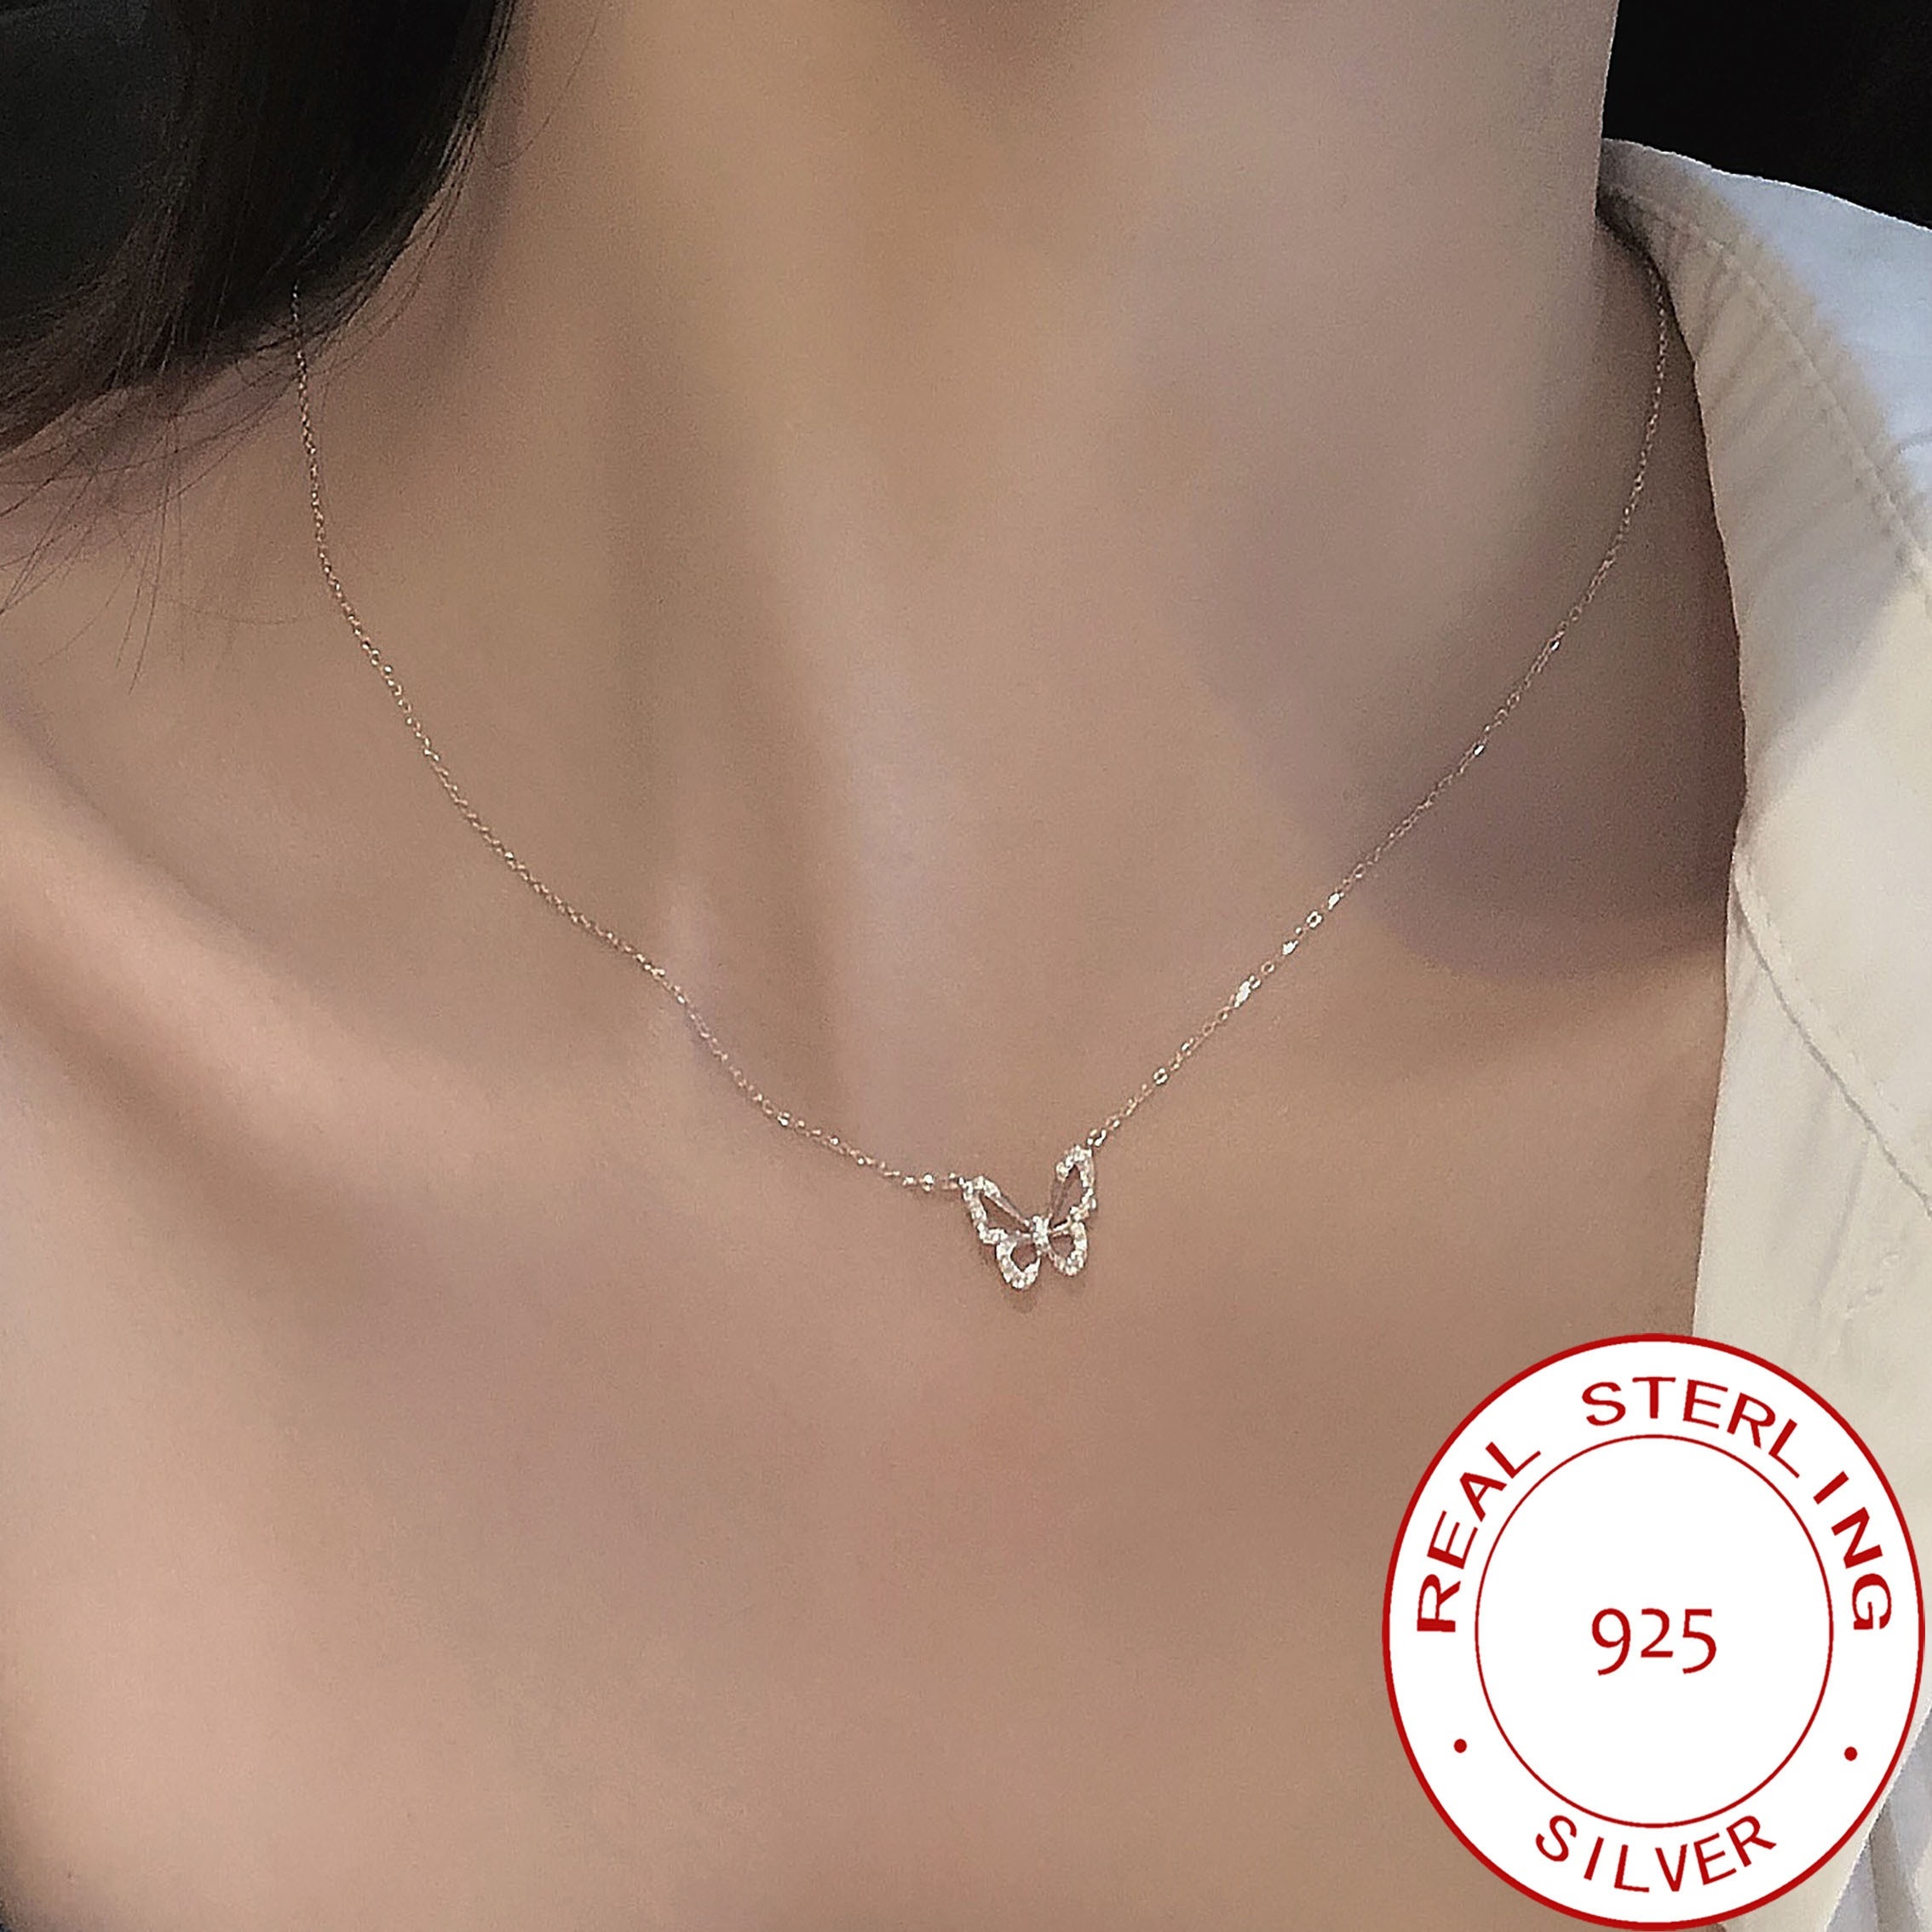 925 Sterling Silver Hypoallergenic Women's Necklace Butterfly Pendant  Clavicle Chain Neck Jewelry Gift